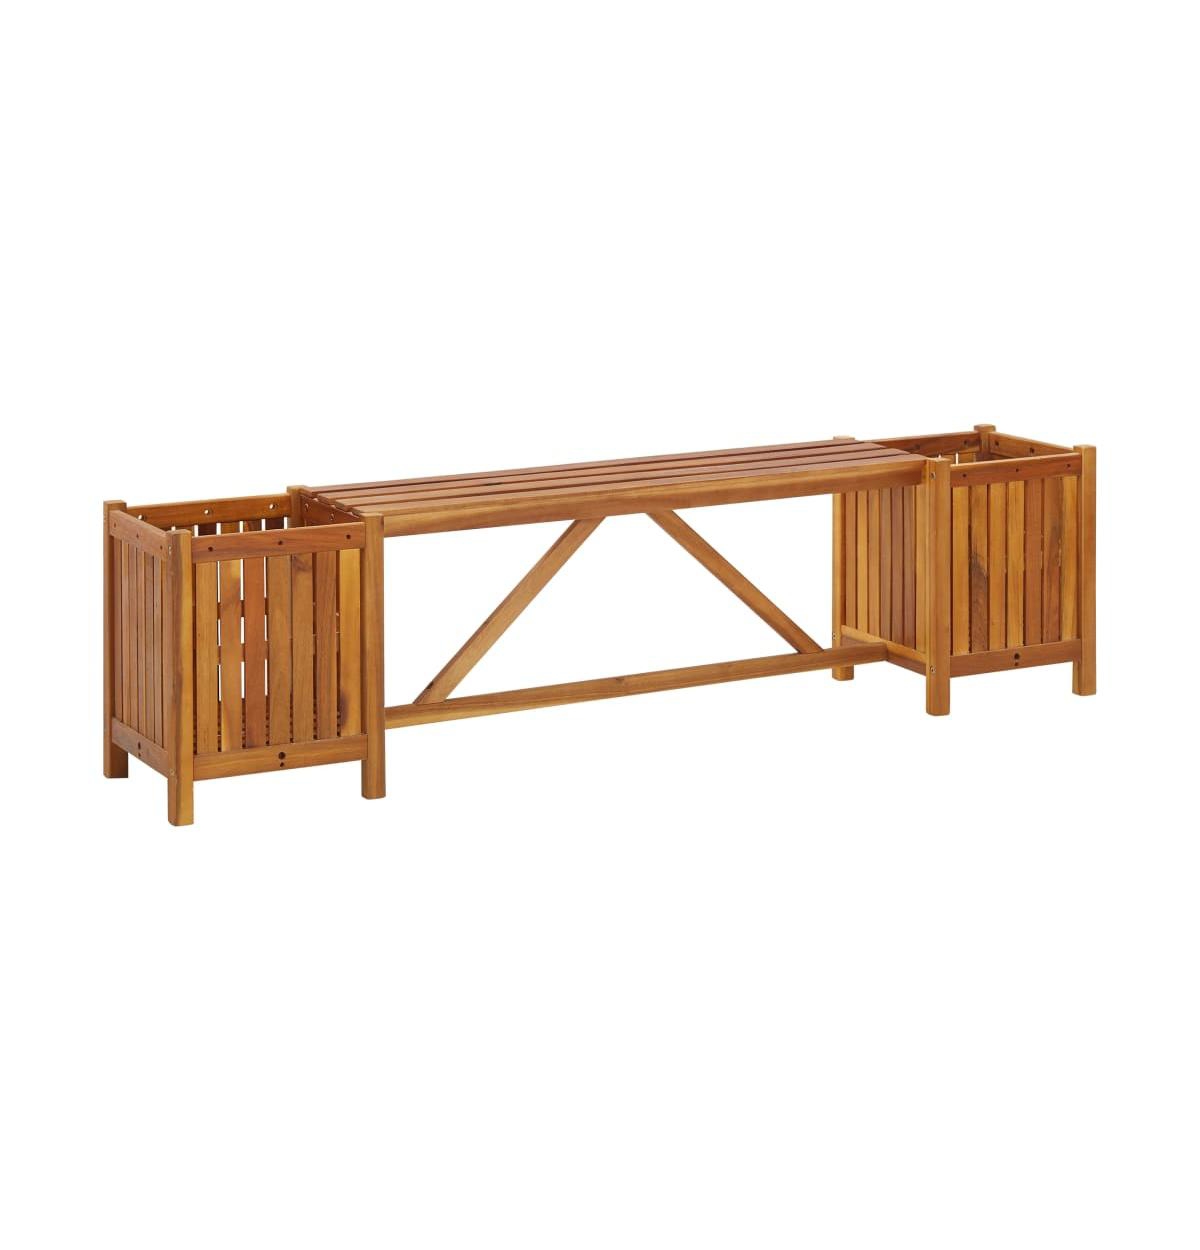 Vidaxl Patio Bench With 2 Planters 59.1"x11.8"x15.7" Solid Acacia Wood In Brown